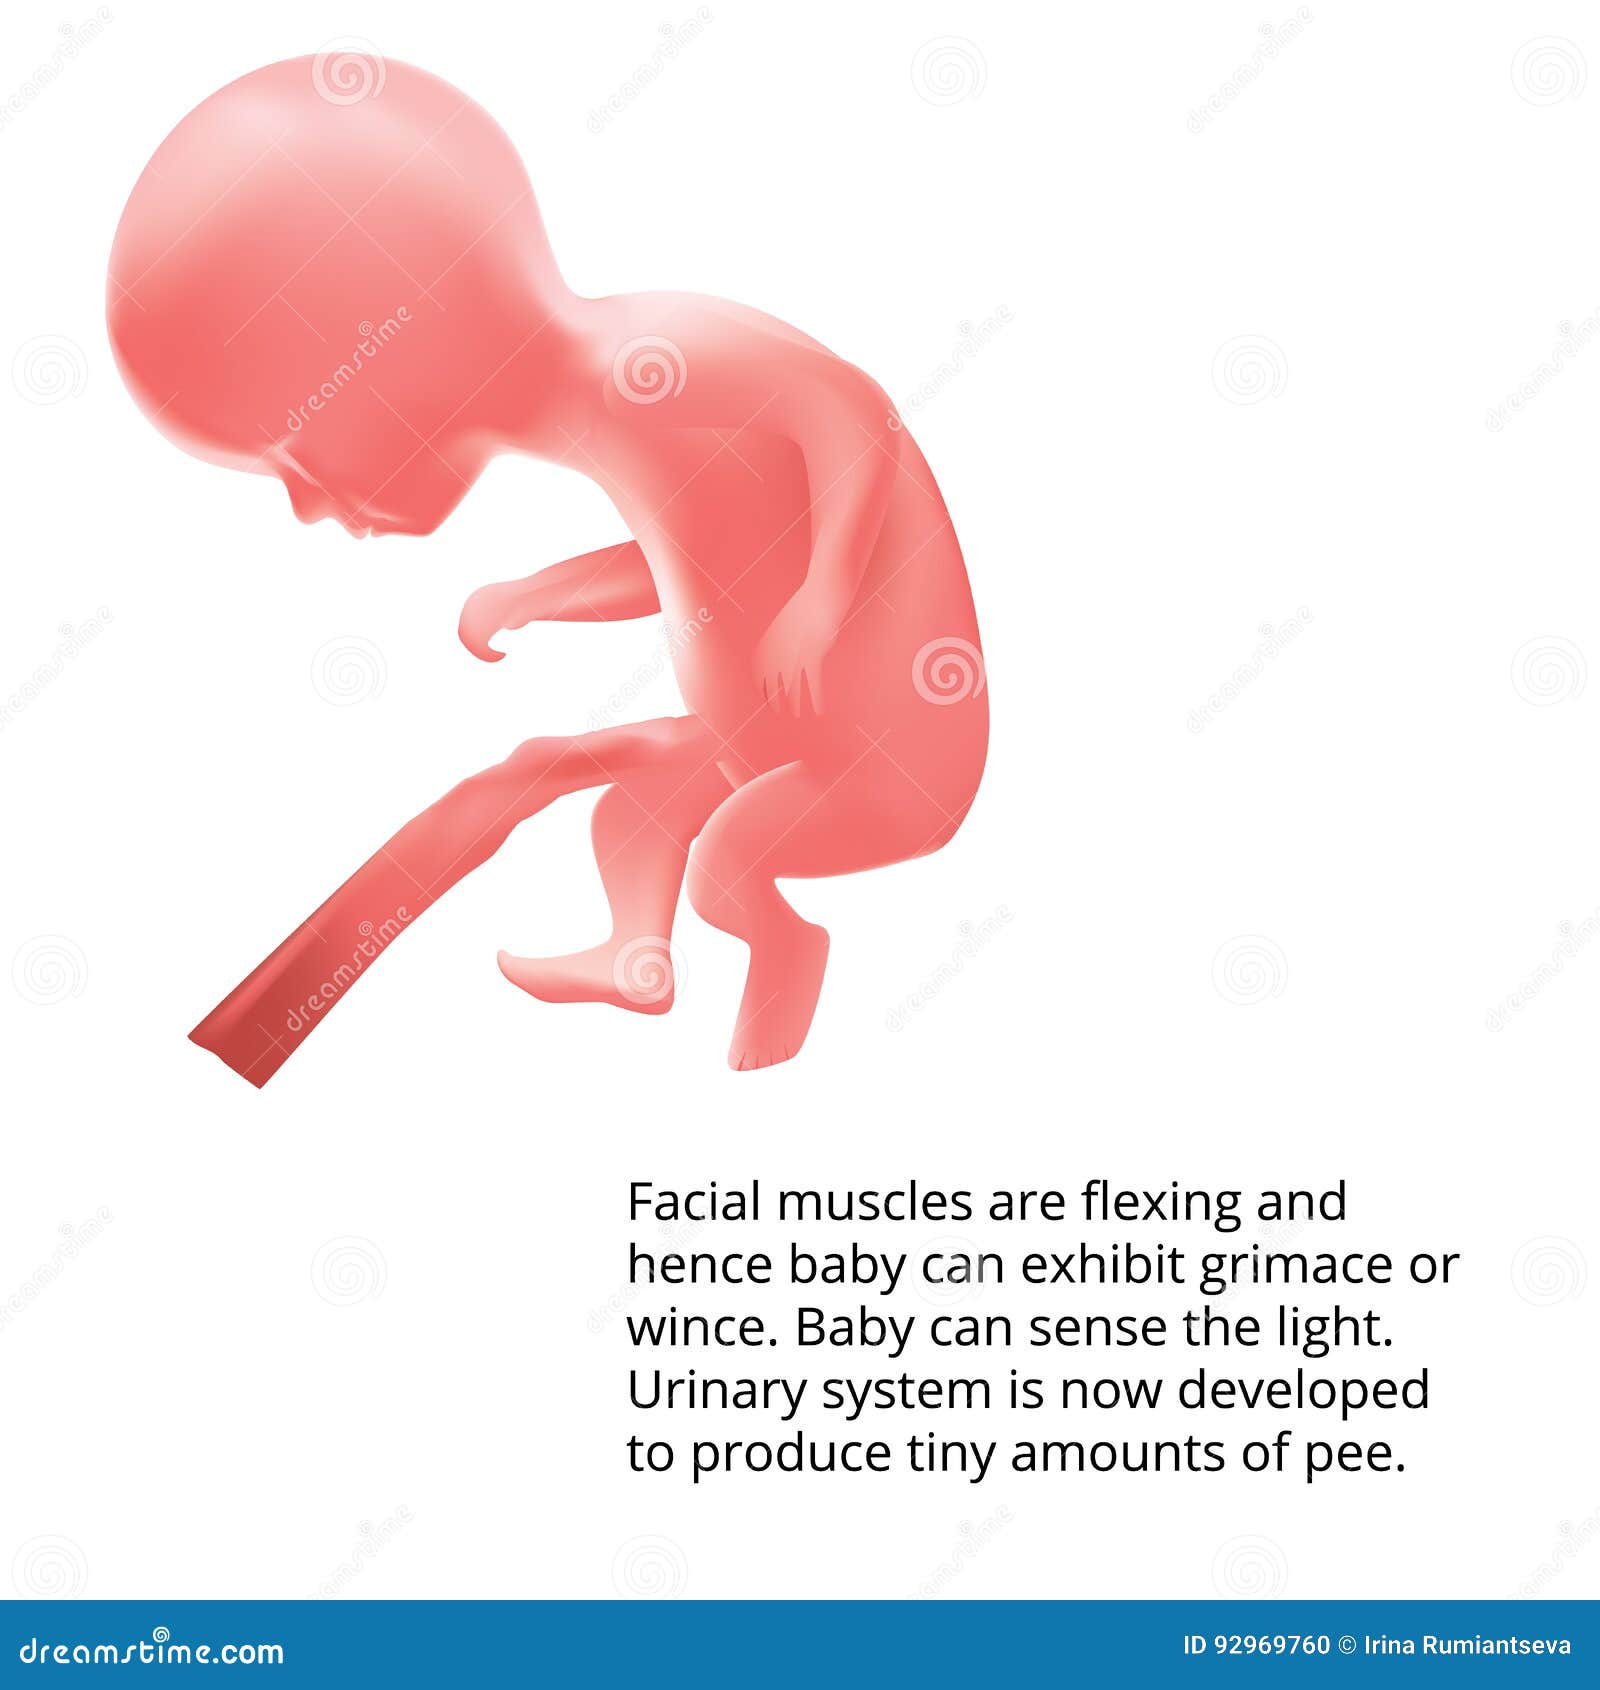 pregnant-human-fetus-inside-the-womb-fetus-stages-stock